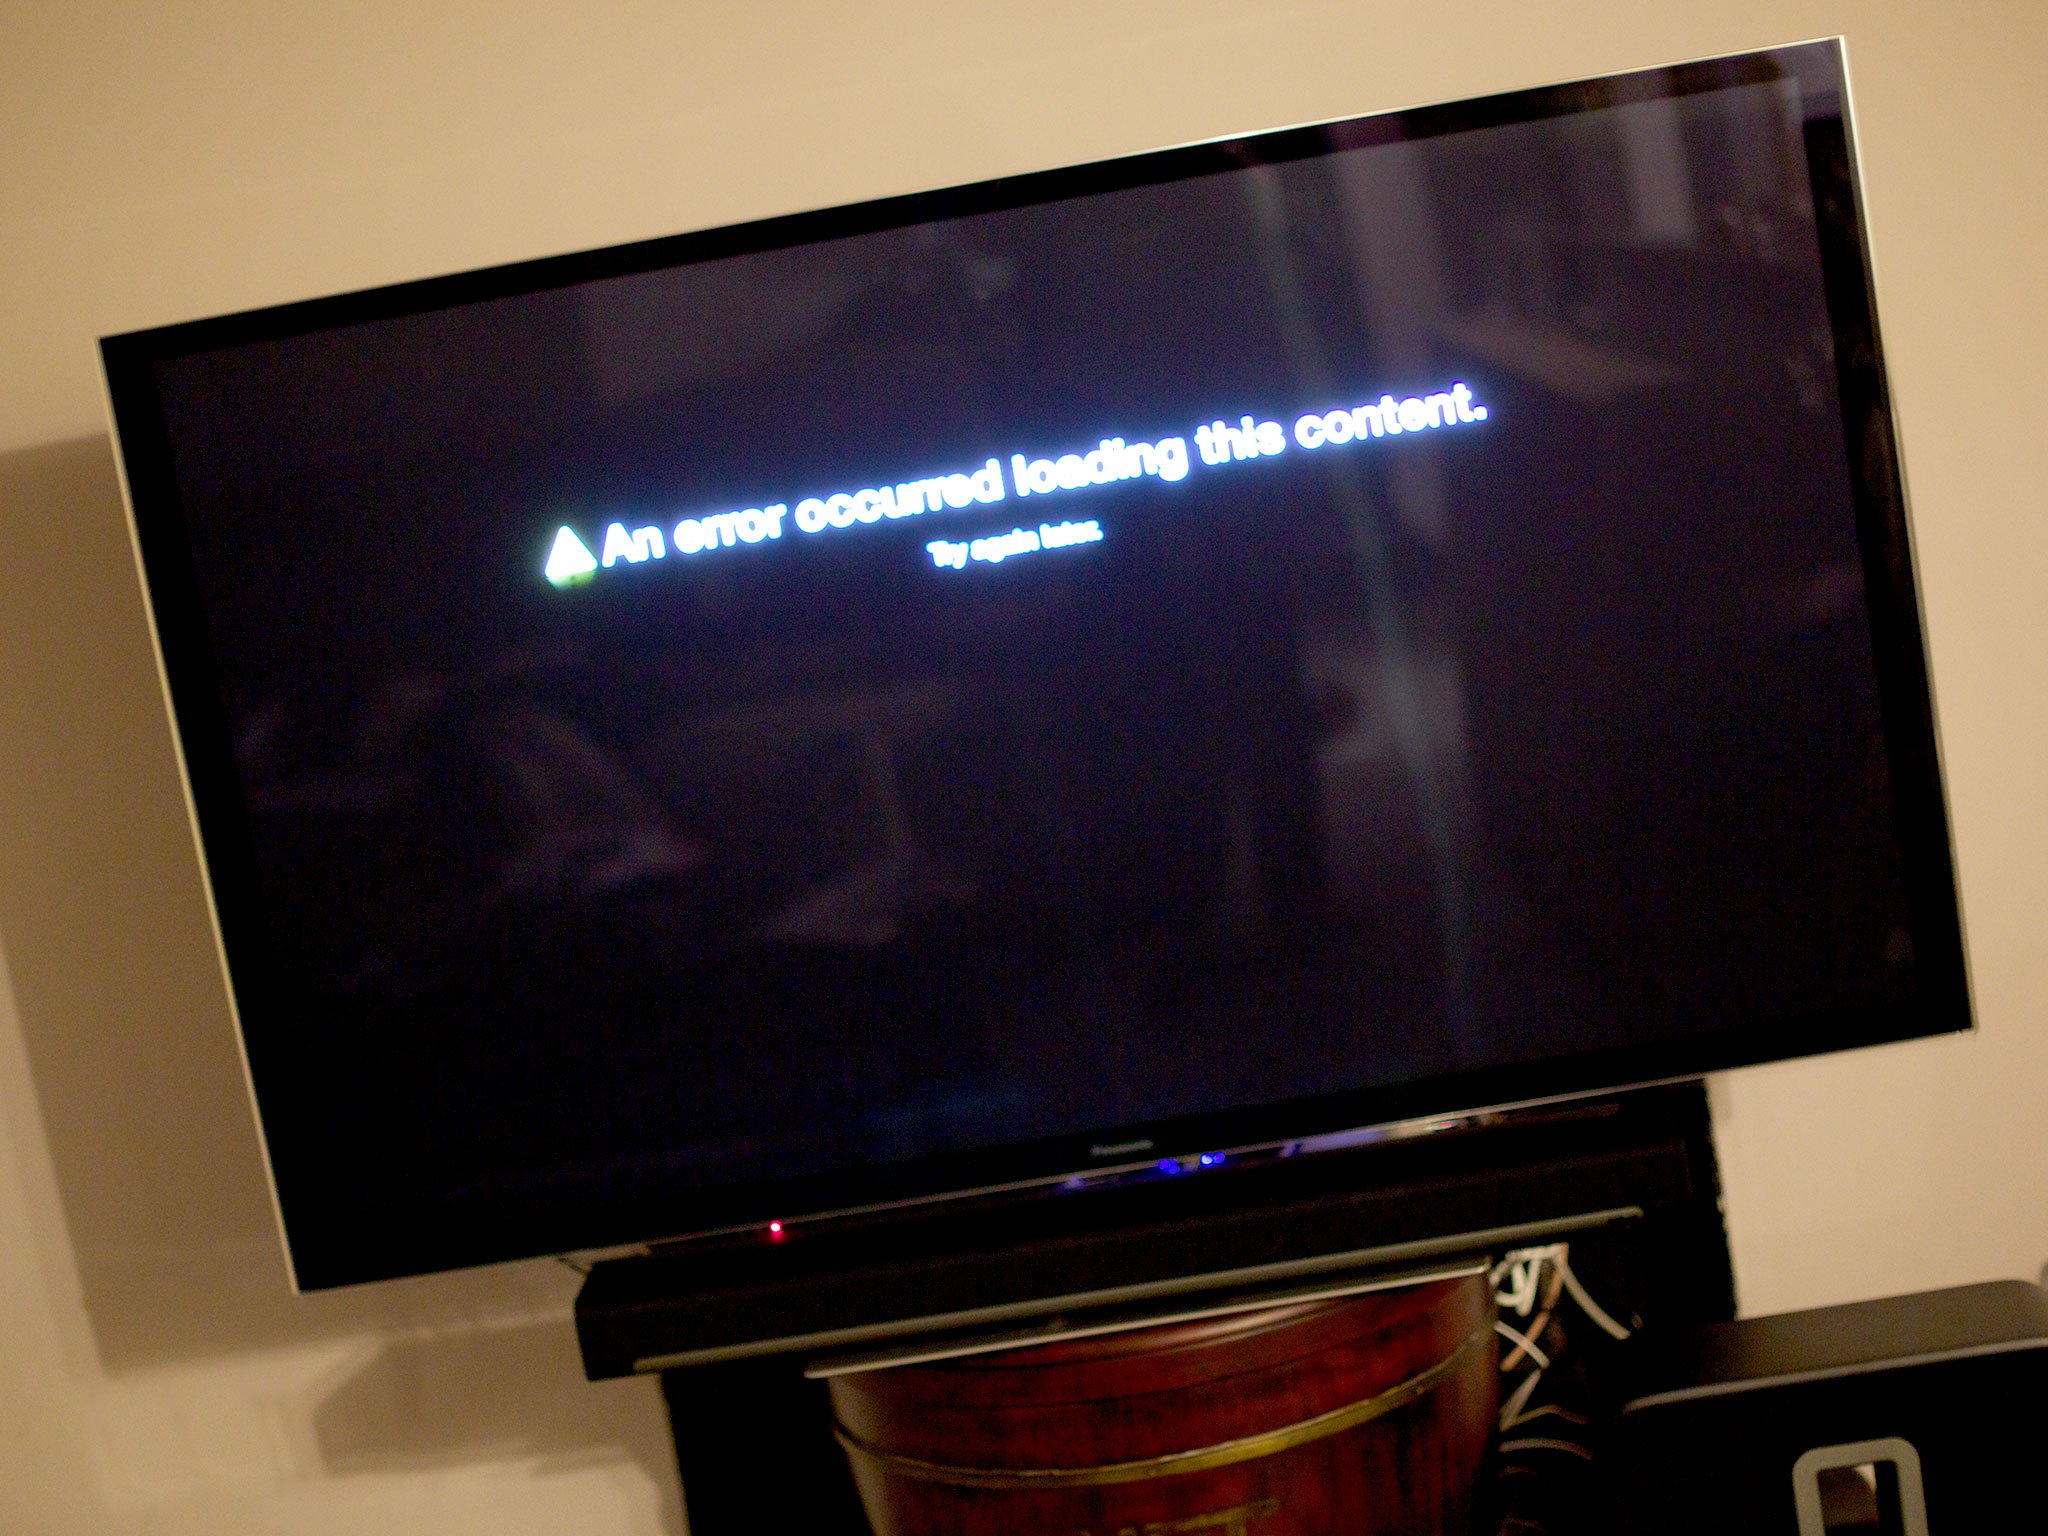 Netflix on Apple TV throwing up the dreaded 'An error occurred loading this content'? Here's how to fix it!